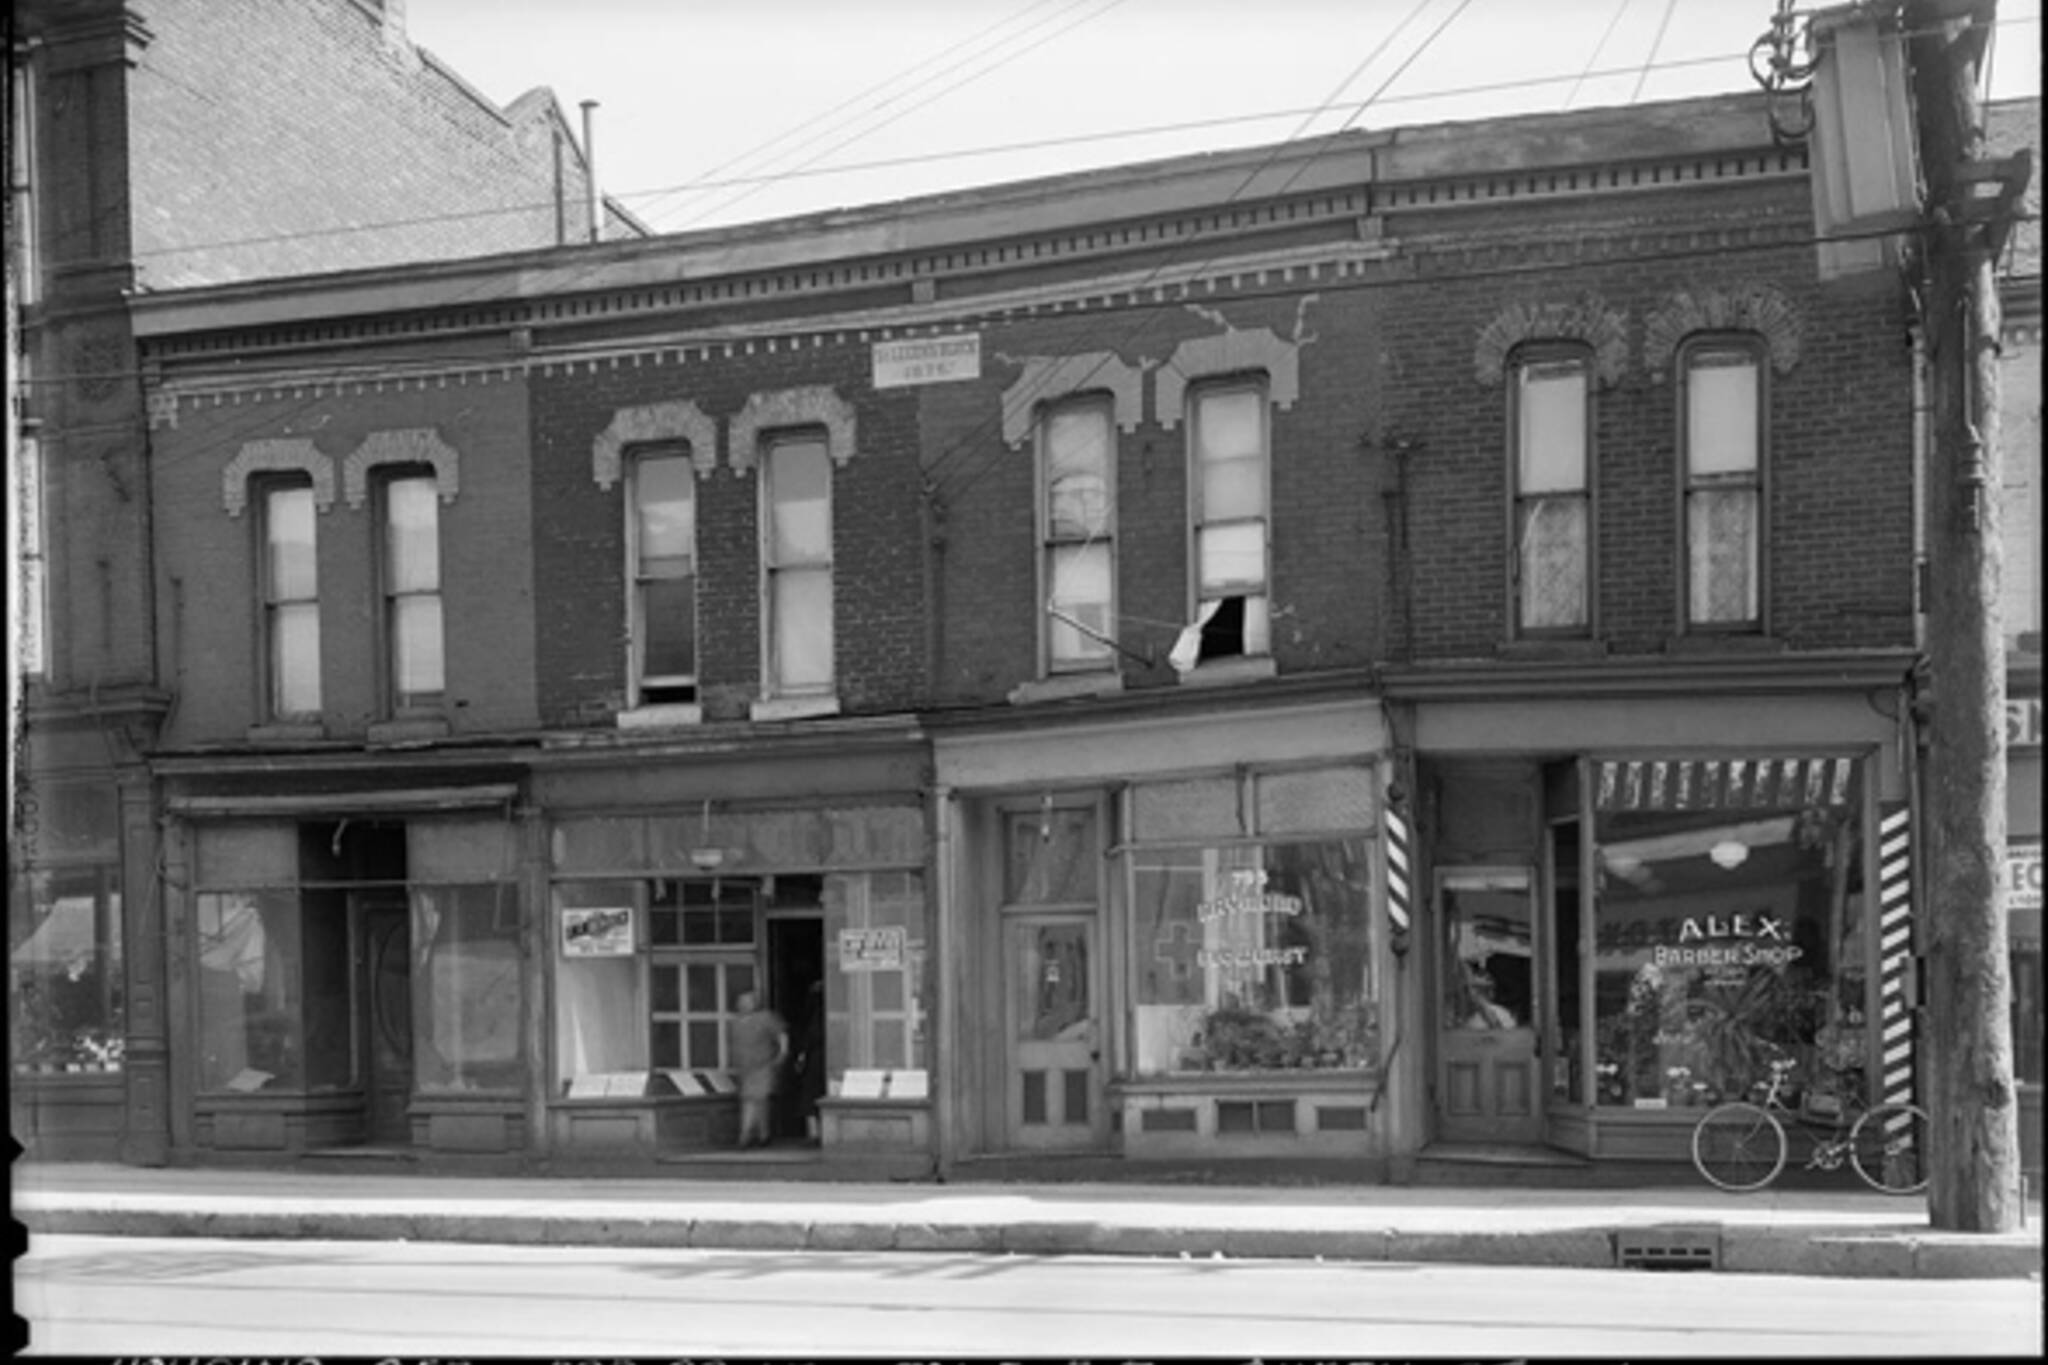 What Queen West used to look like in Toronto